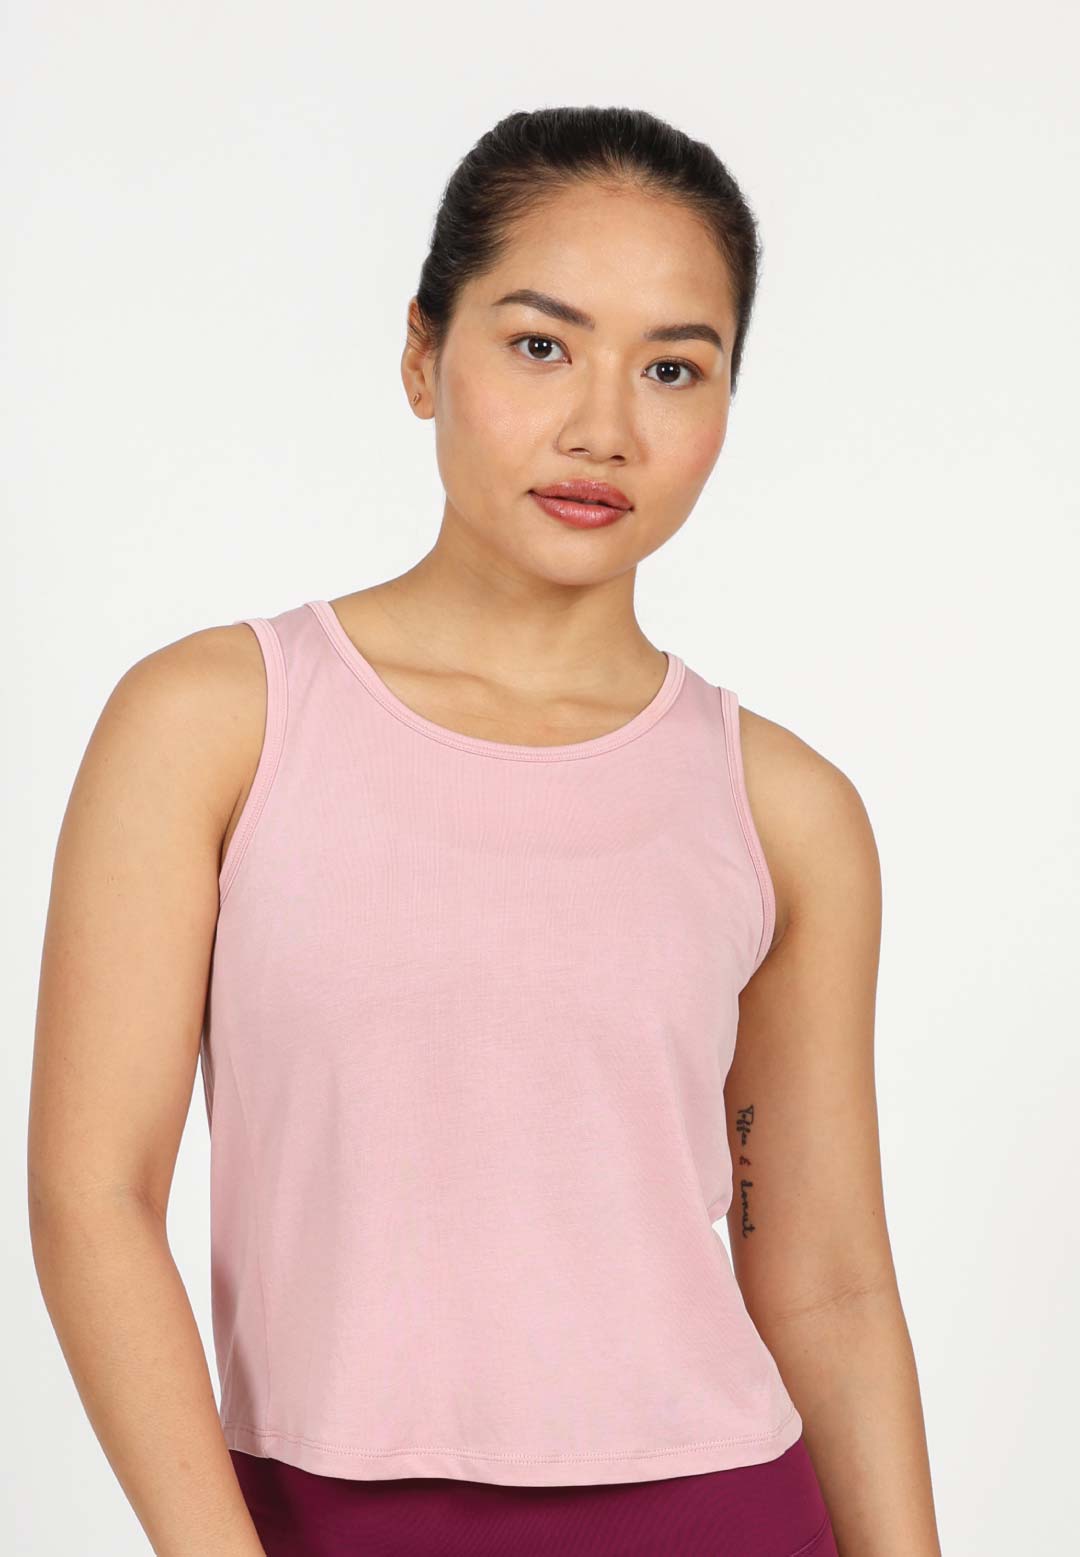 KaLI_store Tank Tops with Built In Bras Summer Tank Tops for Women